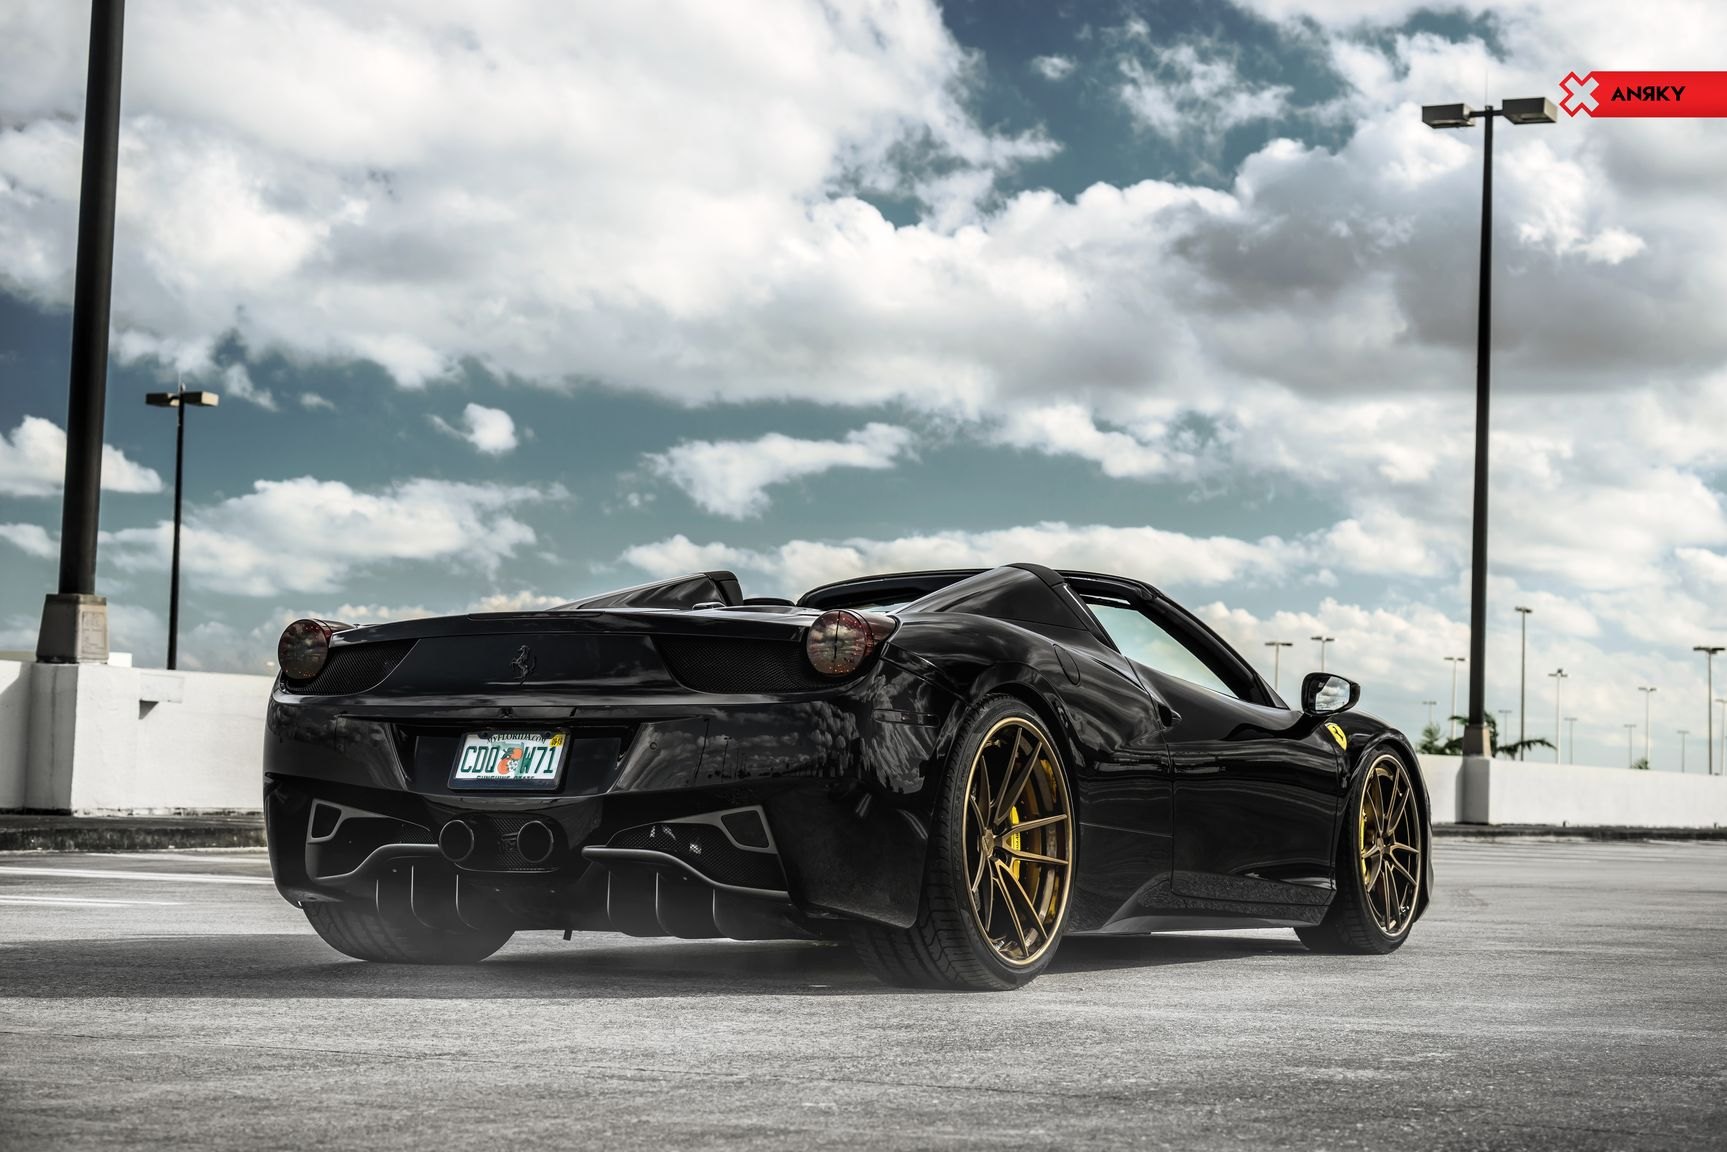 Aftermarket Rear Diffuser on Black Ferrari 458 - Photo by Anrky Wheels